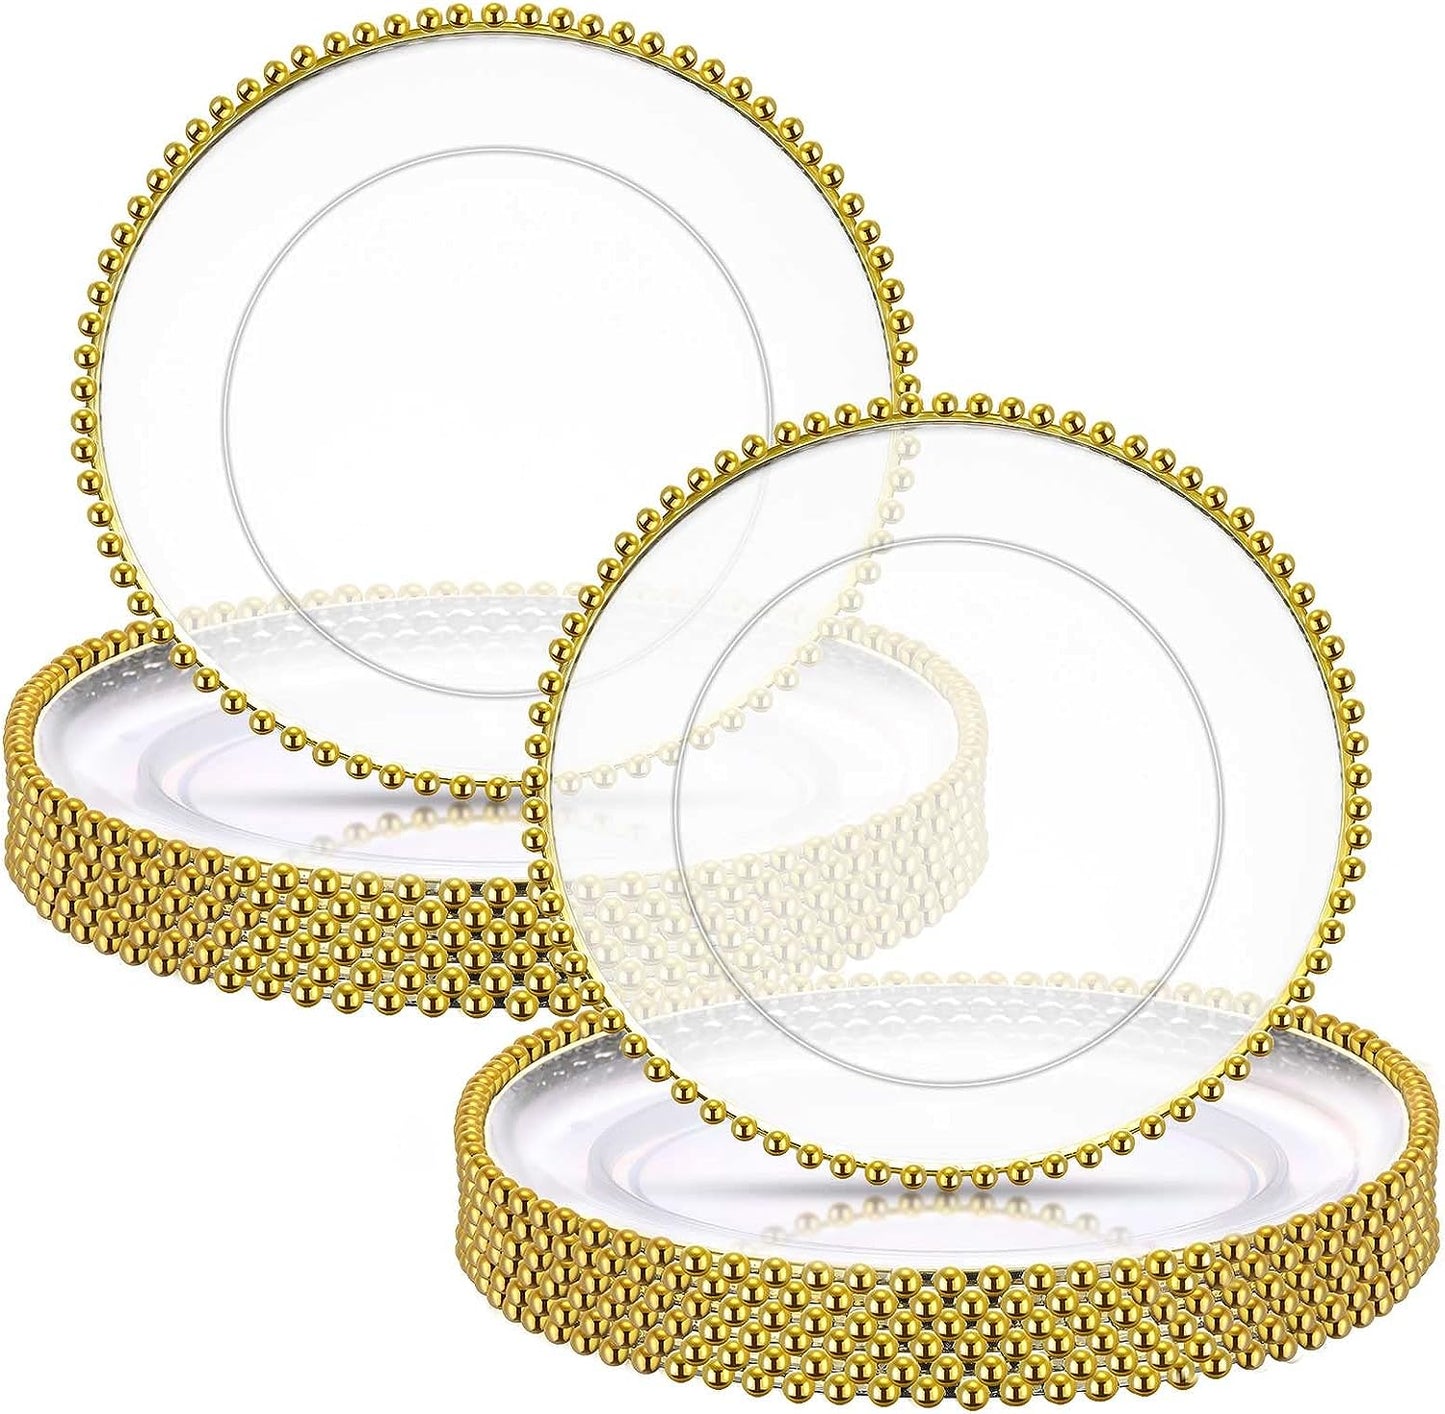 clear glass charger plate with gold beads around the perimeter